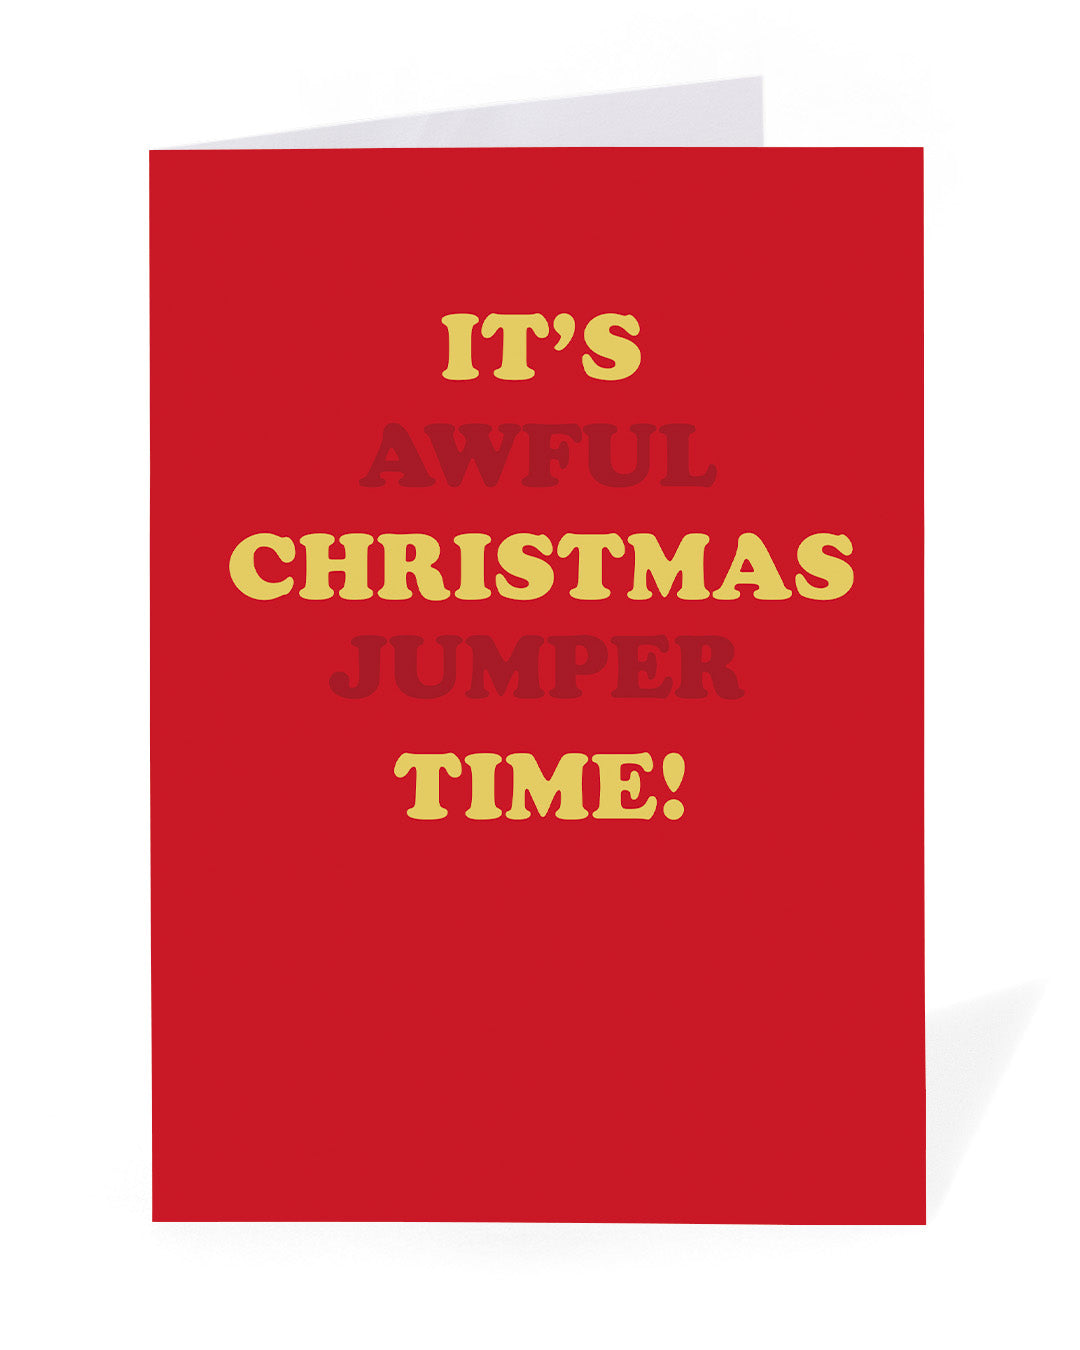 Personalised It's Awful Christmas Jumper Time Christmas Card